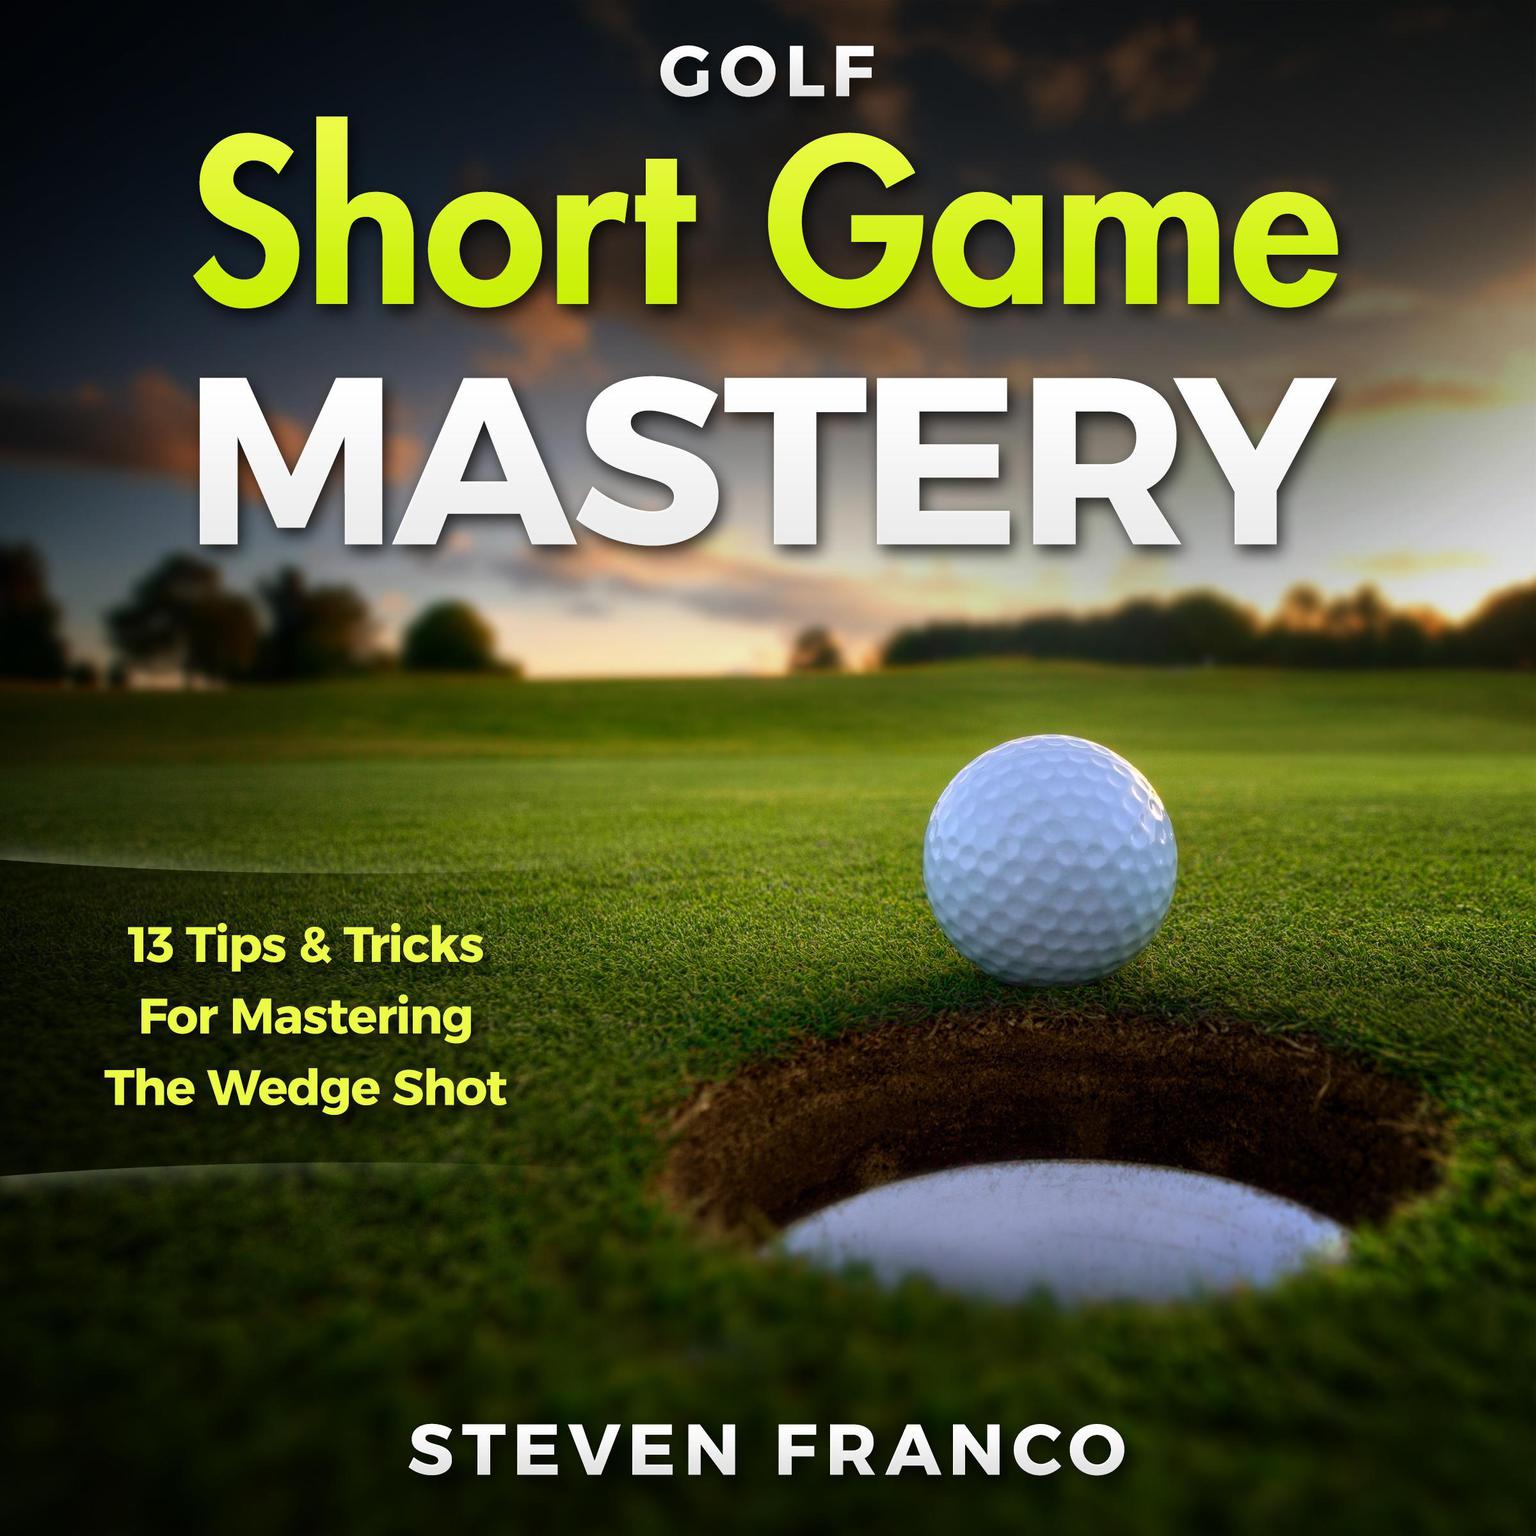 Golf Short Game Mastery: 13 Tips and Tricks for Mastering The Wedge Shot (Golf Mental Game, Golf Psychology & Golf Instruction, Golf Swing Techniques) Audiobook, by Steven Franco